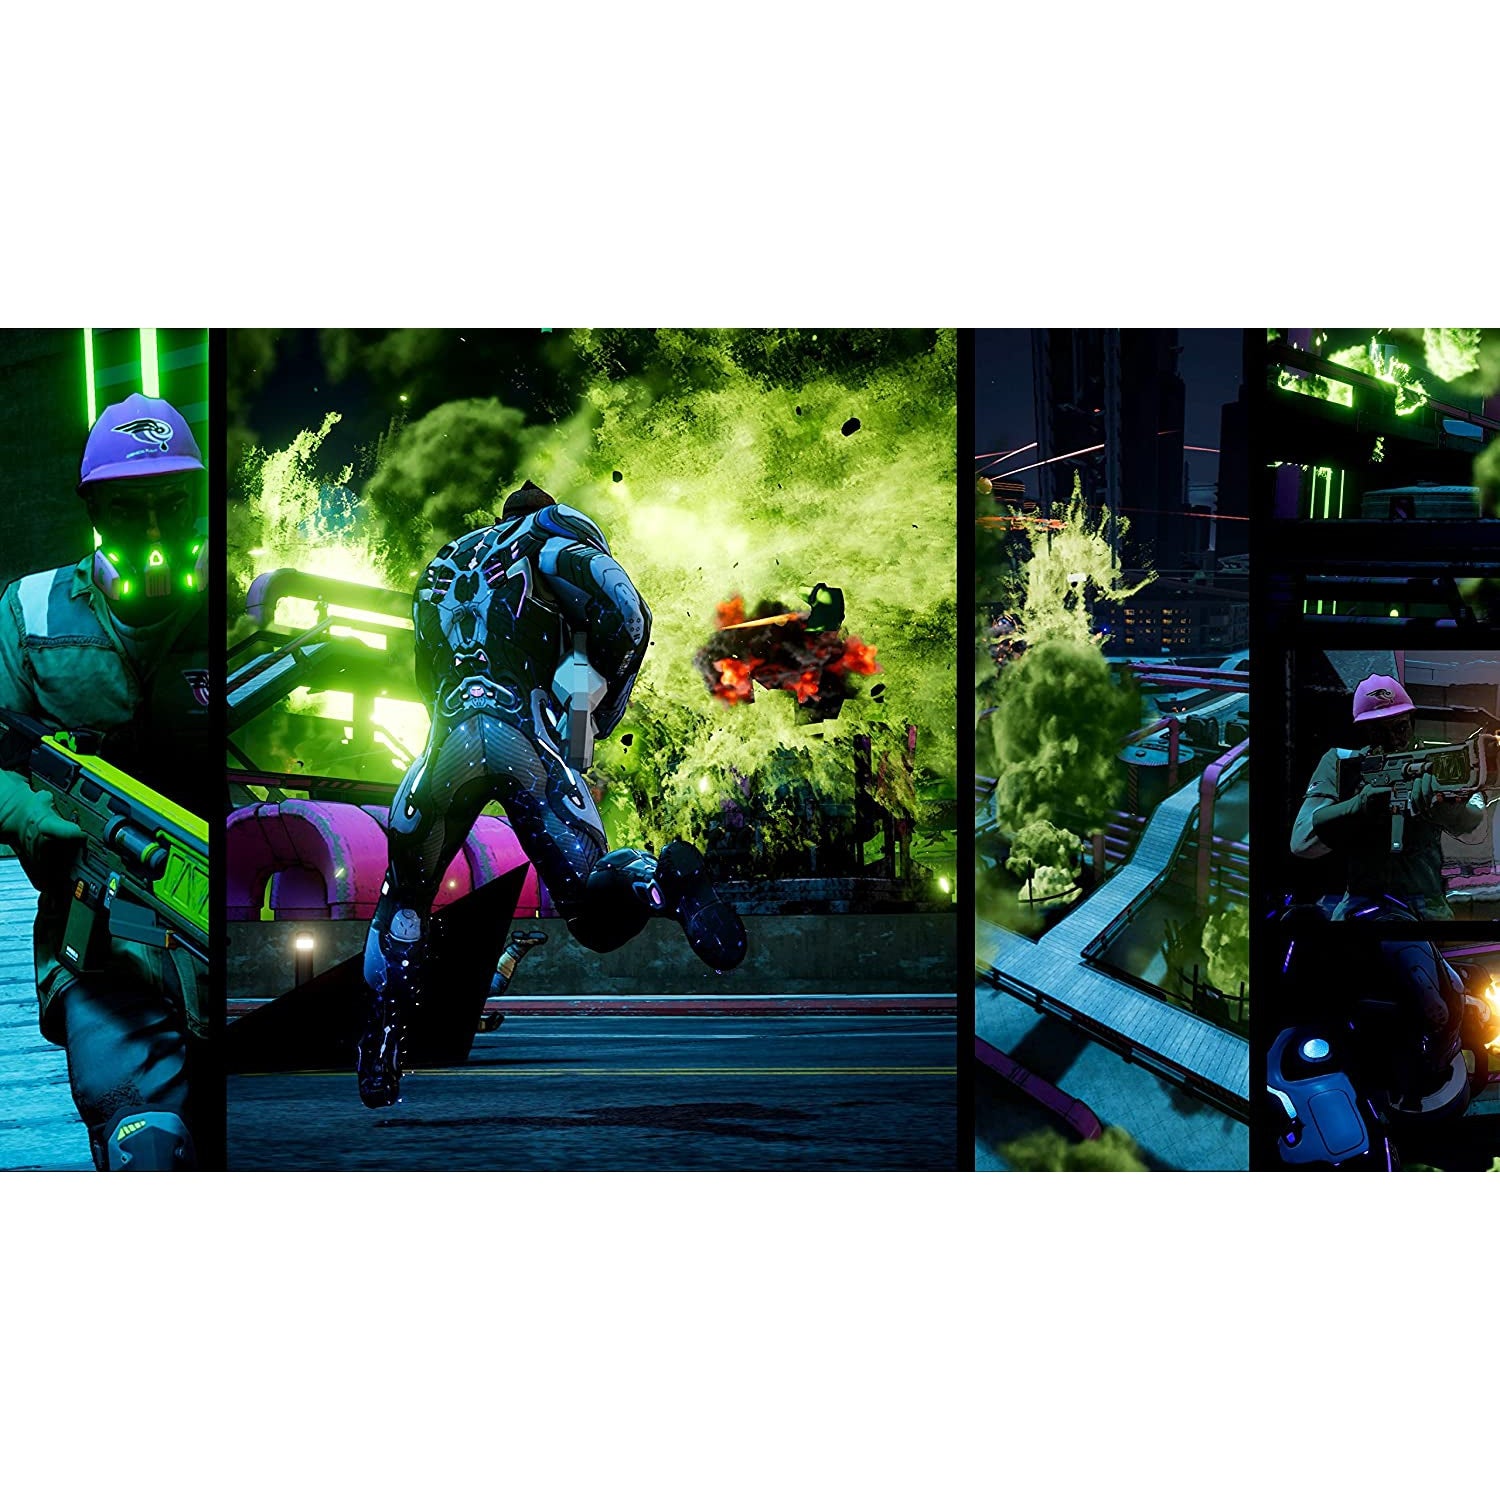 Crackdown 3 (Xbox One) Video Game - Used